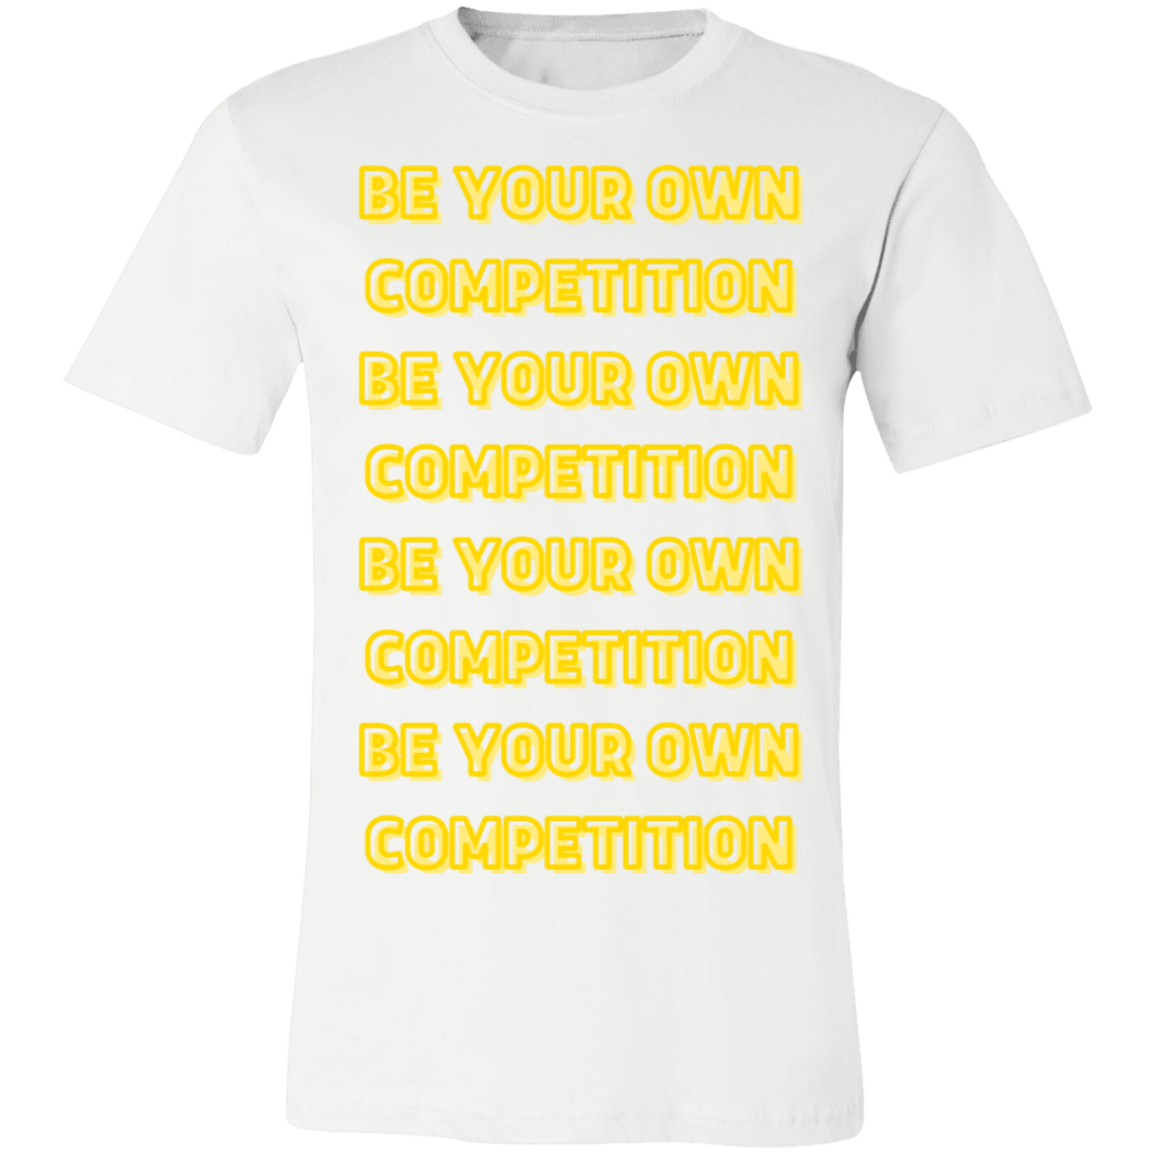 BE YOUR OWN COMPETITION TEE